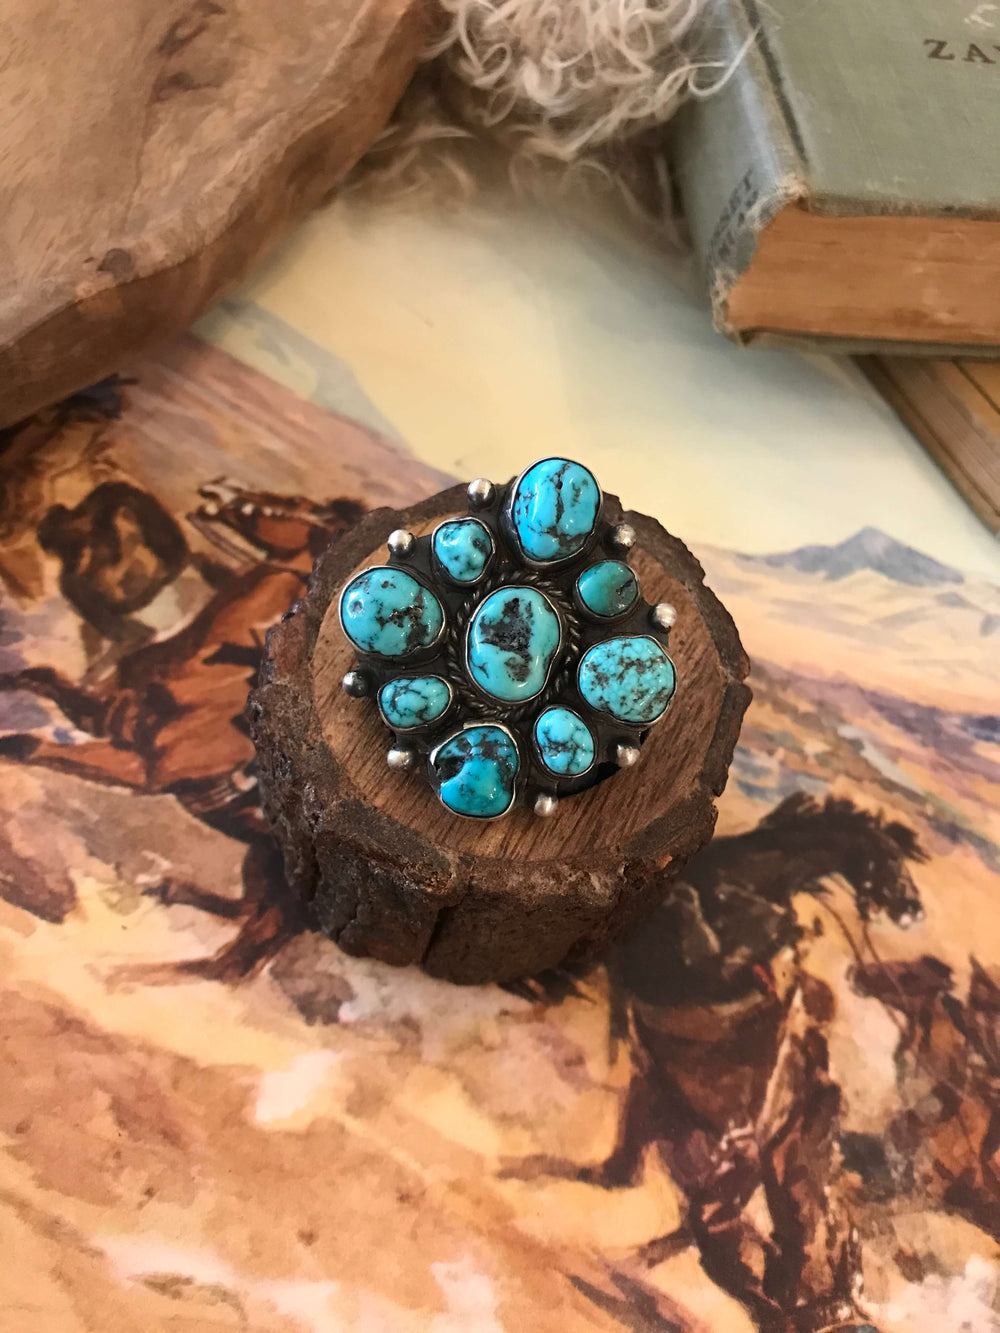 The Van Alstyne Cluster Ring 2, Adjustable-Rings-Calli Co., Turquoise and Silver Jewelry, Native American Handmade, Zuni Tribe, Navajo Tribe, Brock Texas